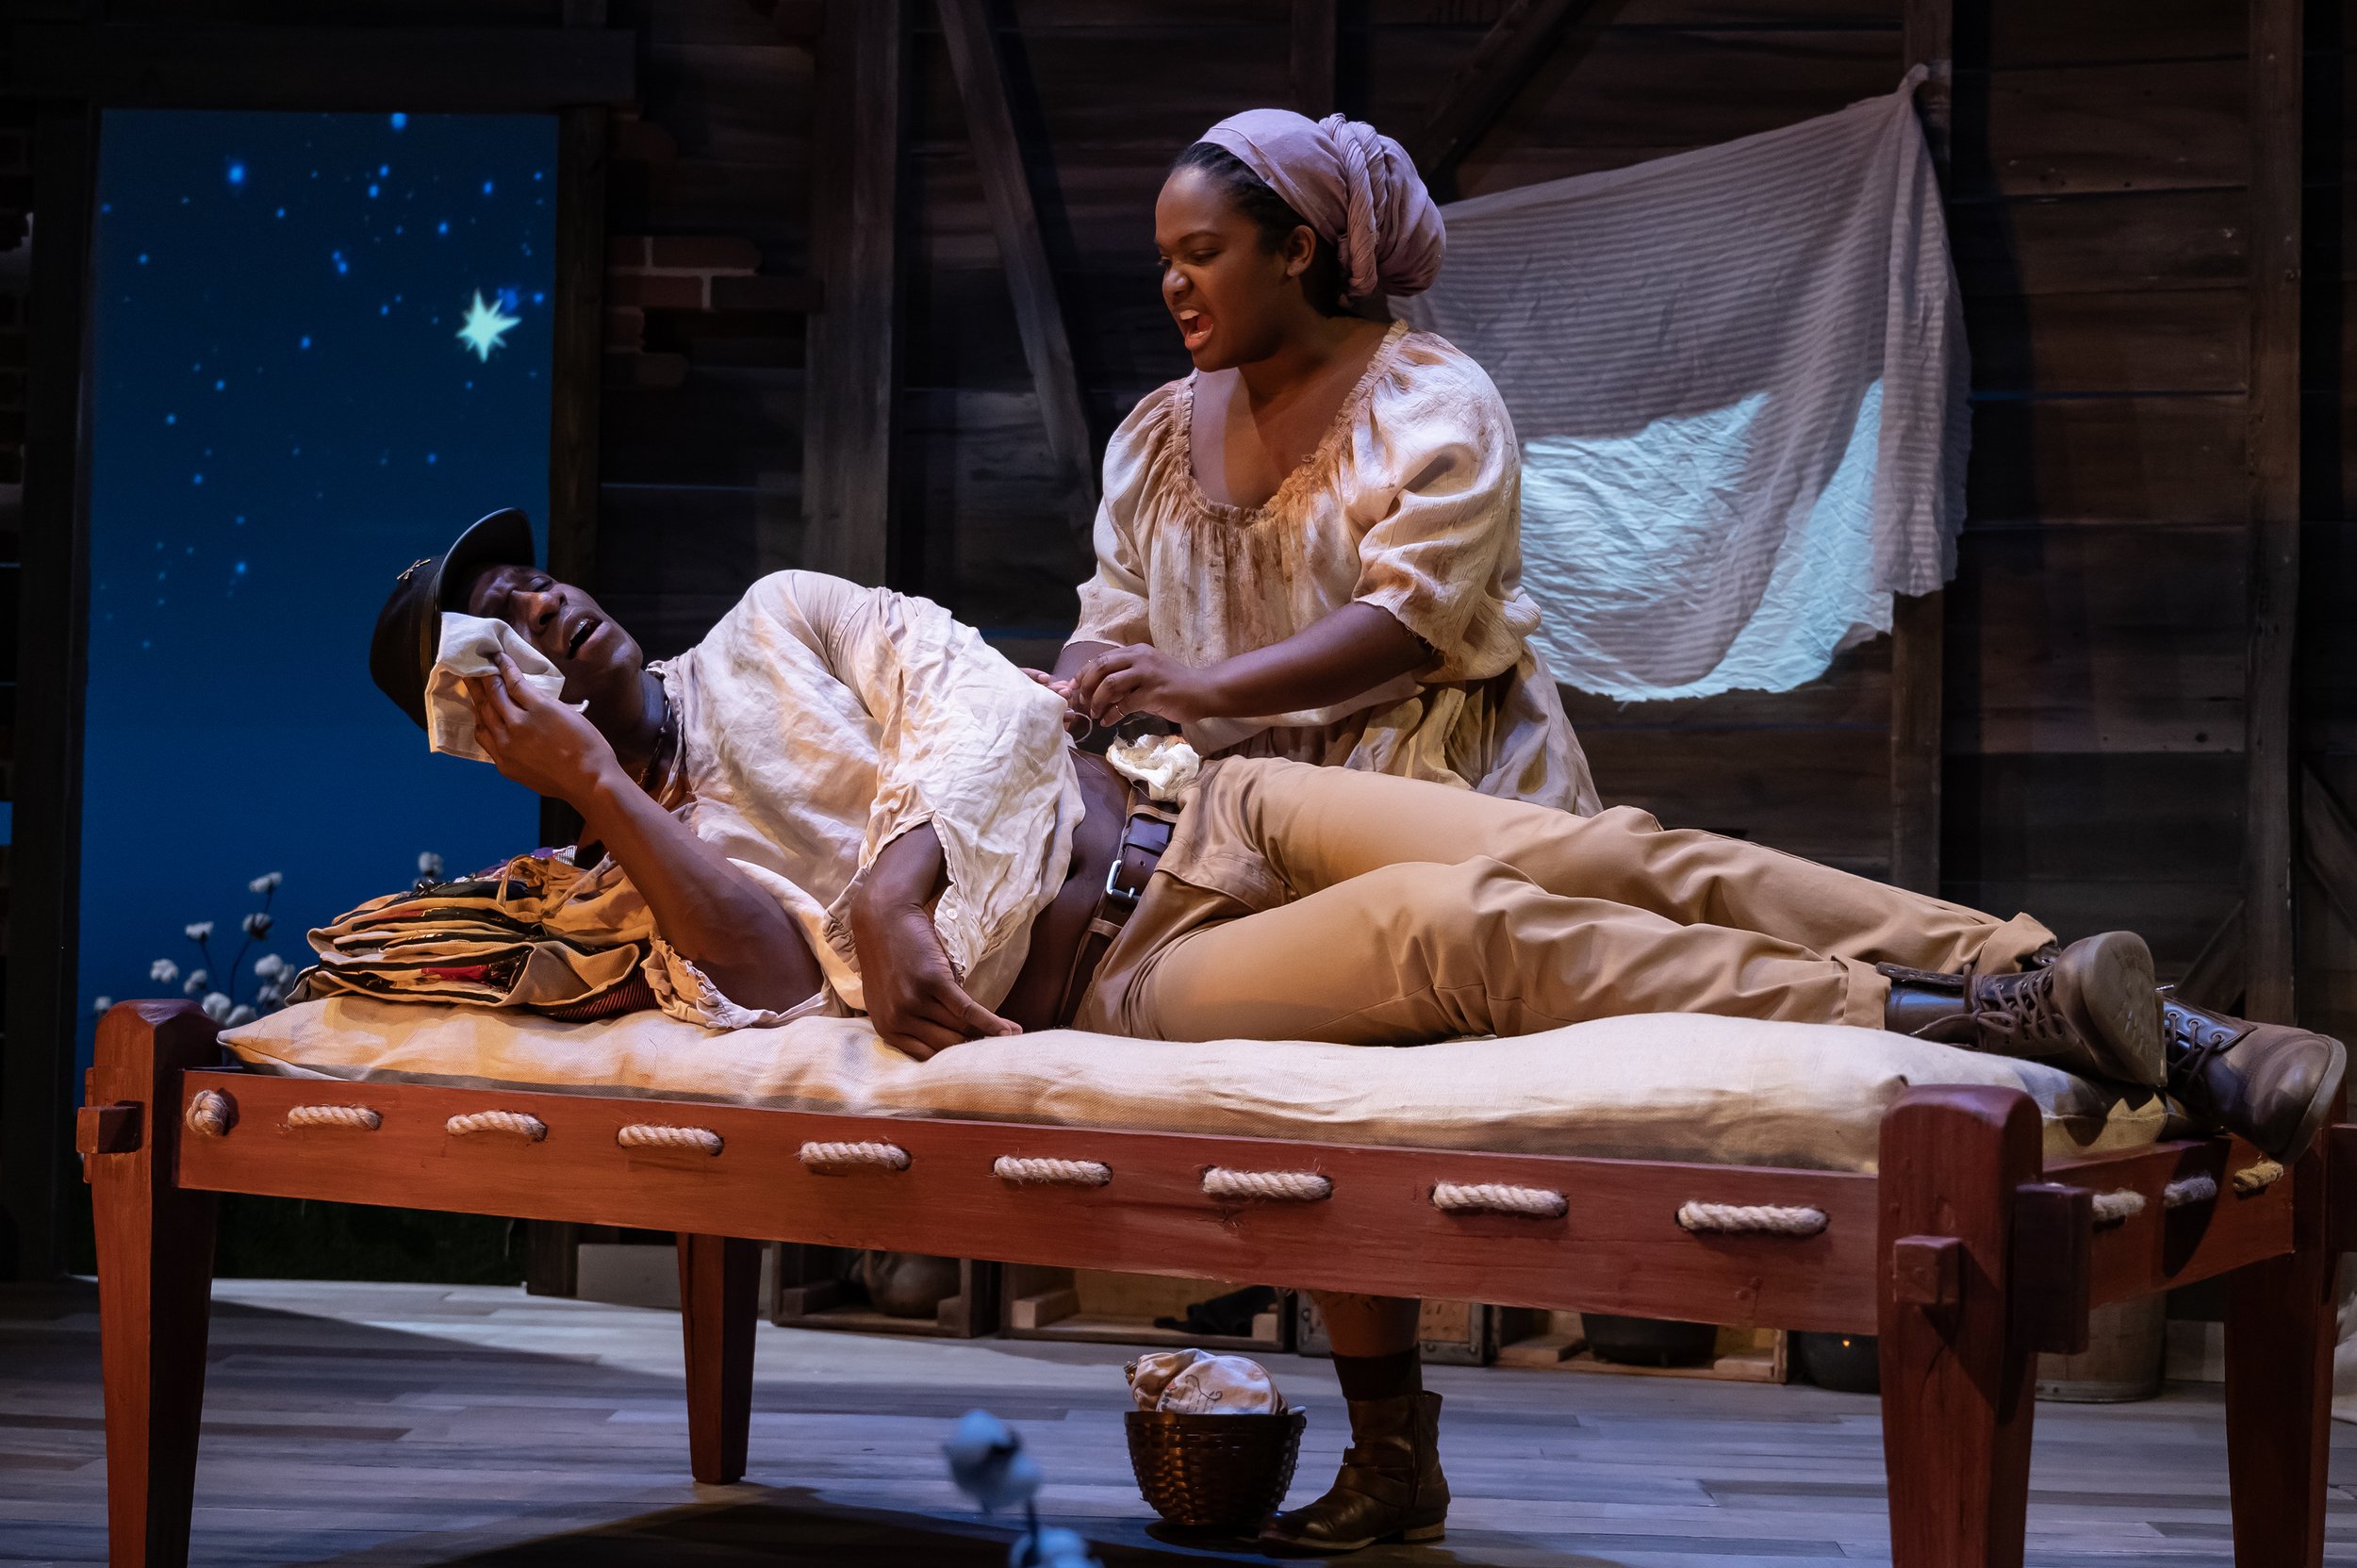   Joel Ashur as Abner and Deidre Staples as Sara in Mosaic Theater’s production of  Confederates  by Dominique Morisseau. Photo by Chris Banks.  